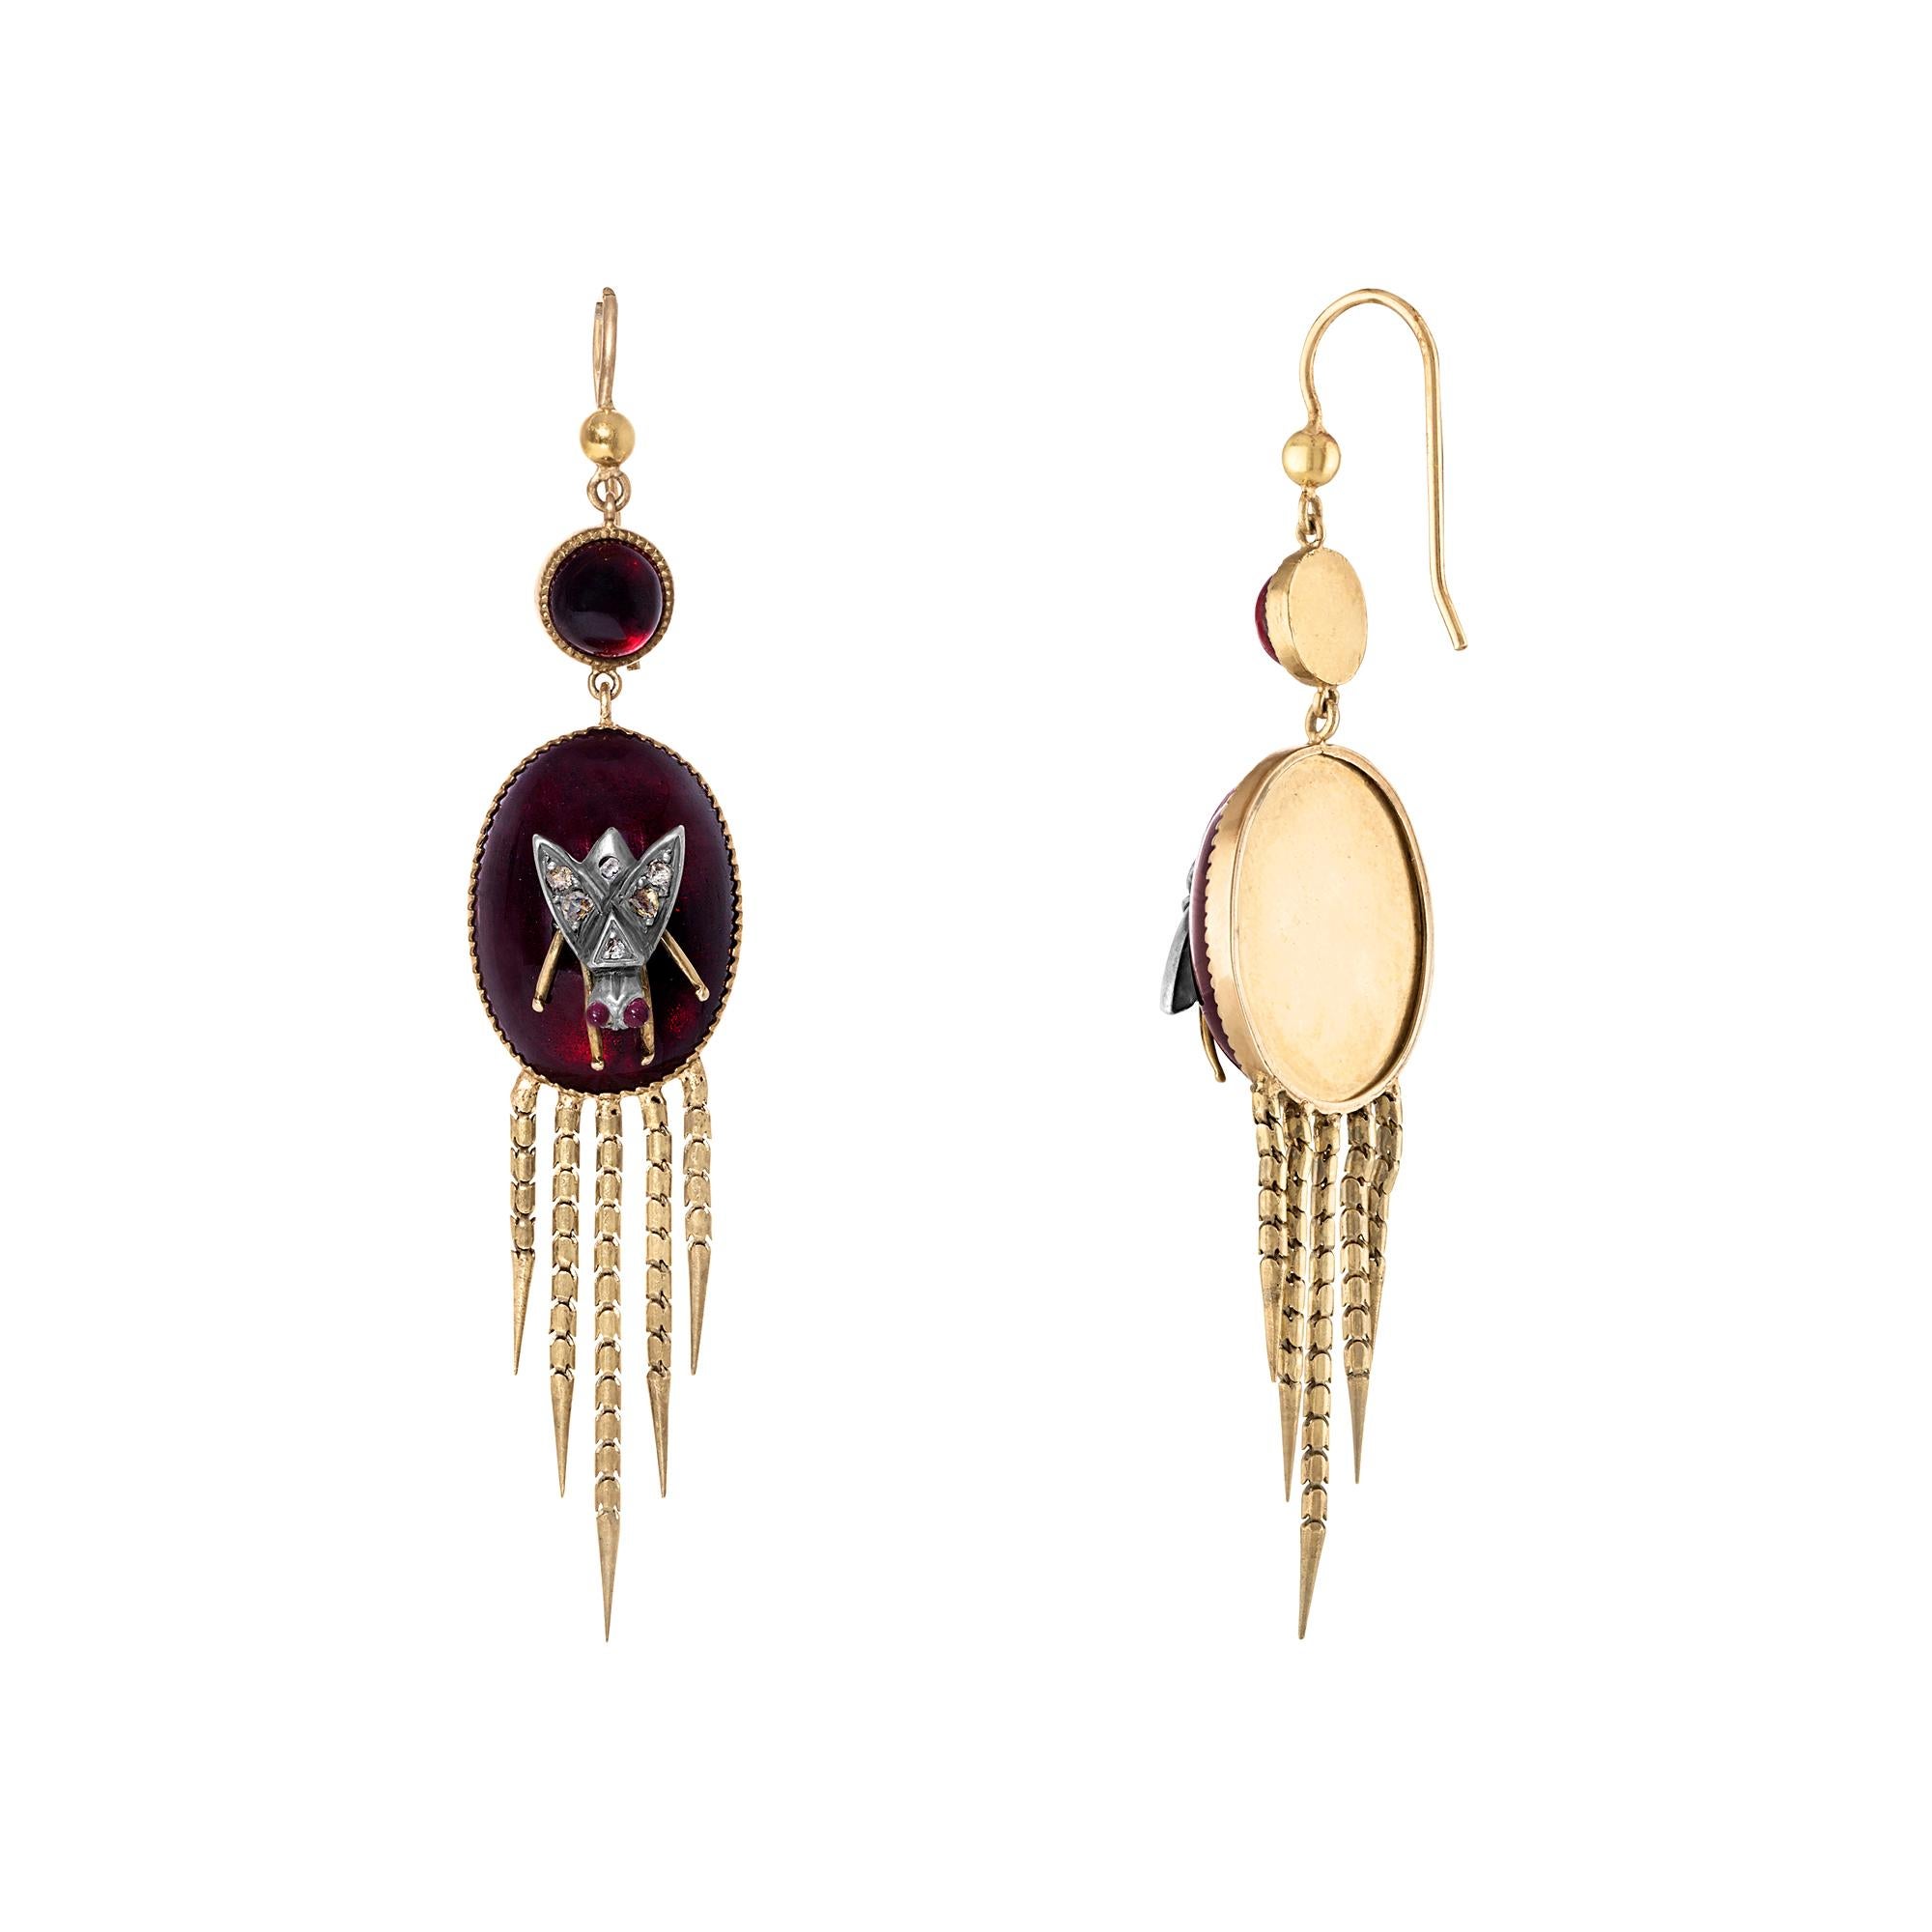 English Victorian Fringed Earrings with Garnet and Diamonds 1